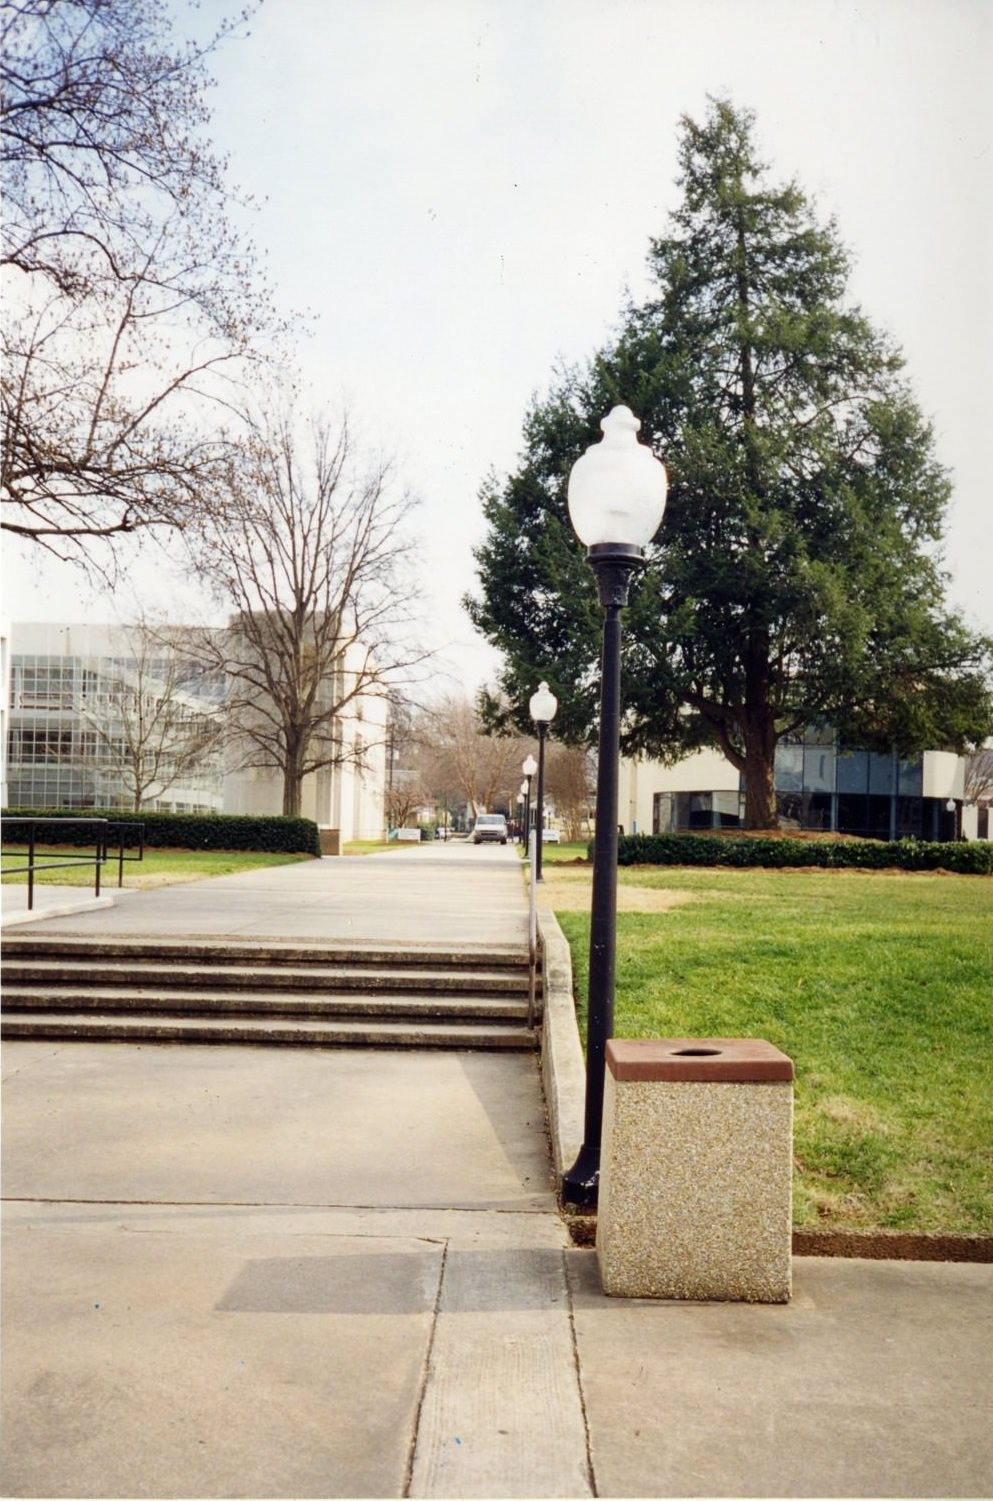 The ATC building on the left and the Citizens building on the right, 1986